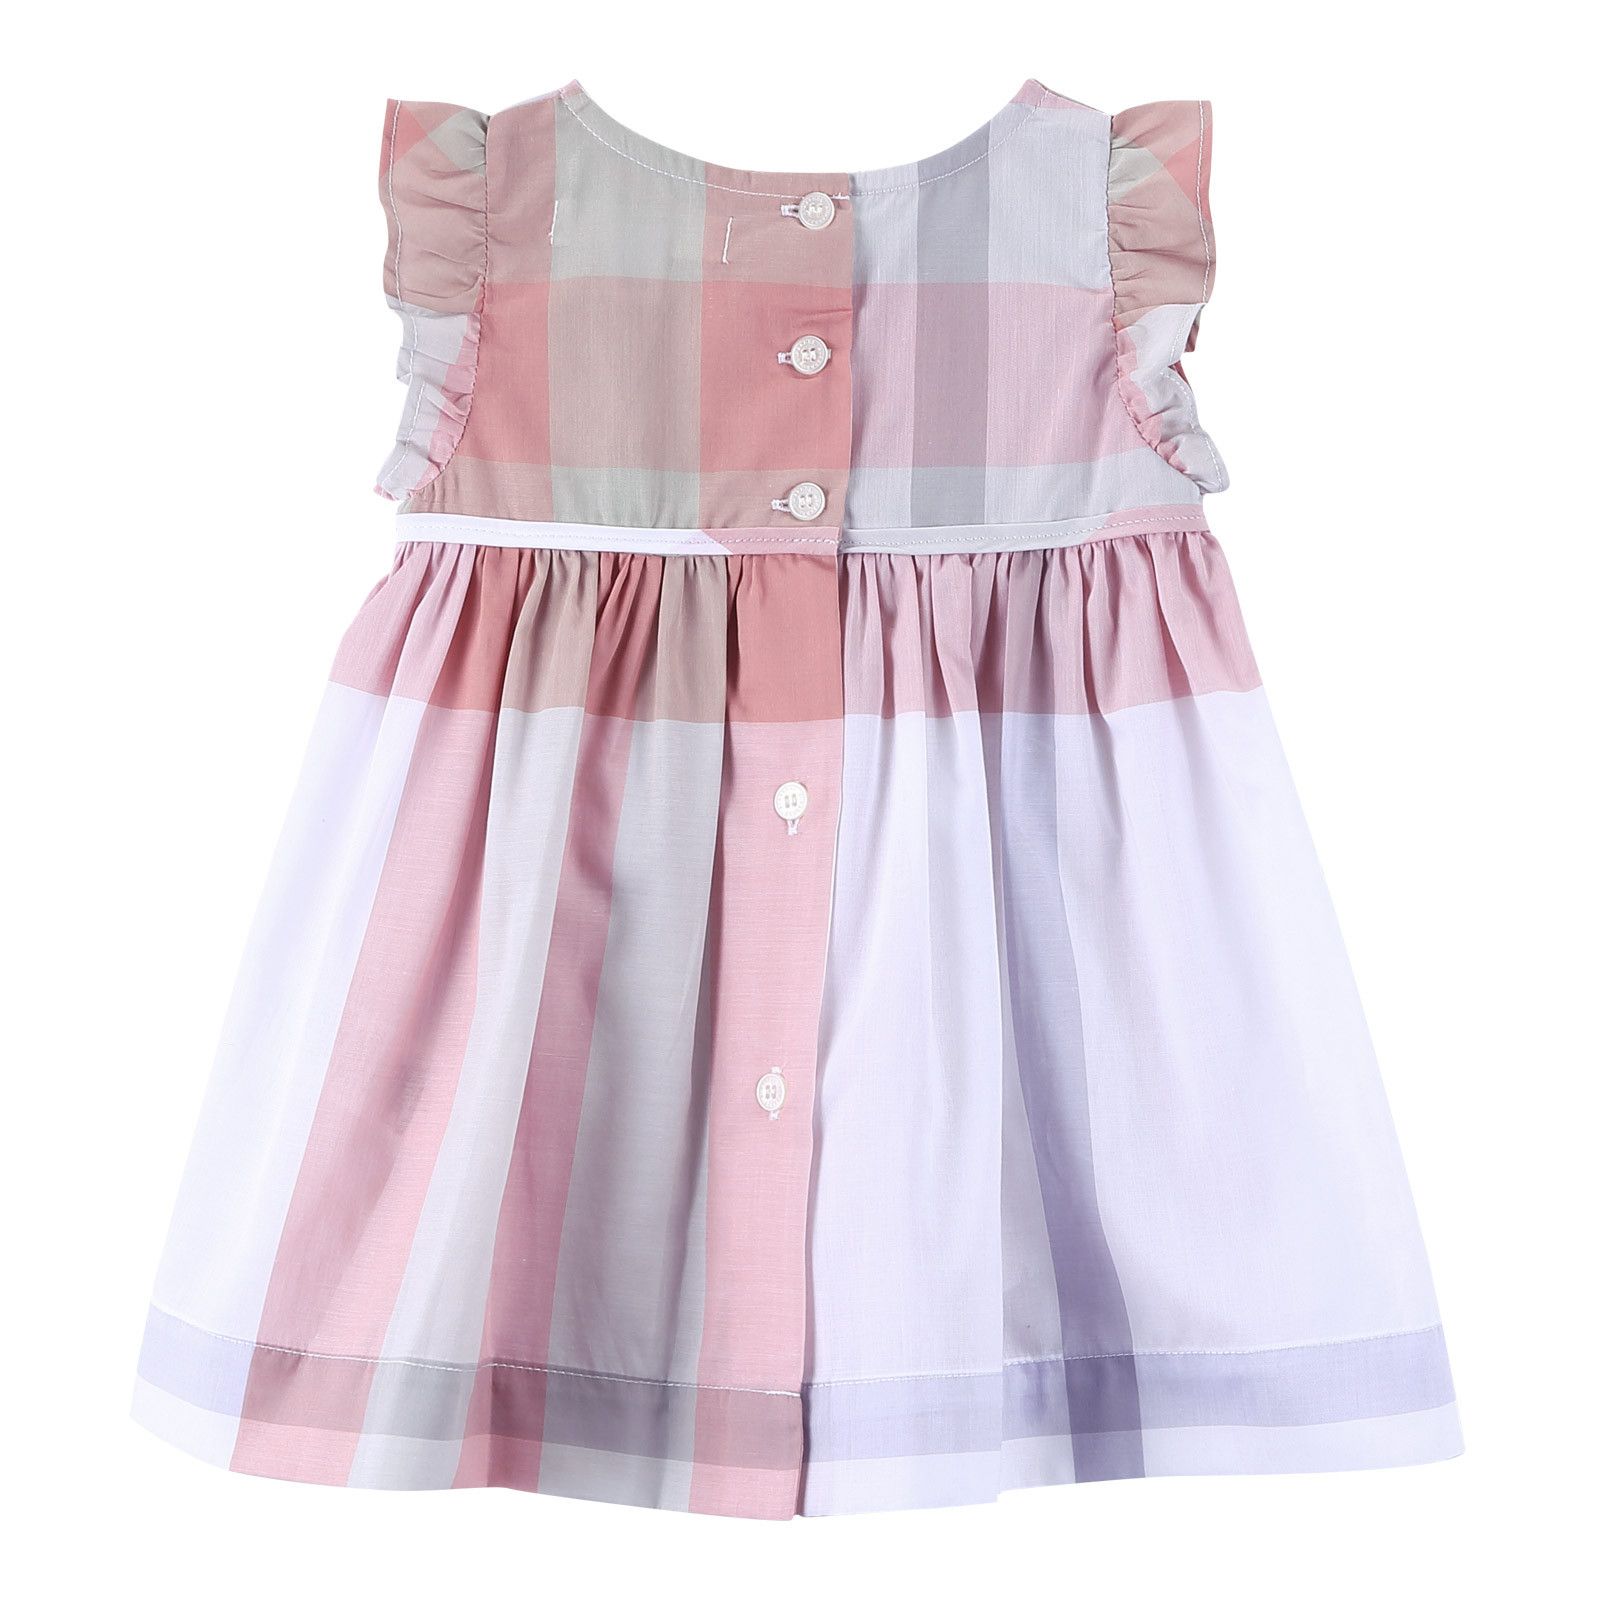 Baby Girls Pink Check Dress With Frill Sleeve - CÉMAROSE | Children's Fashion Store - 2